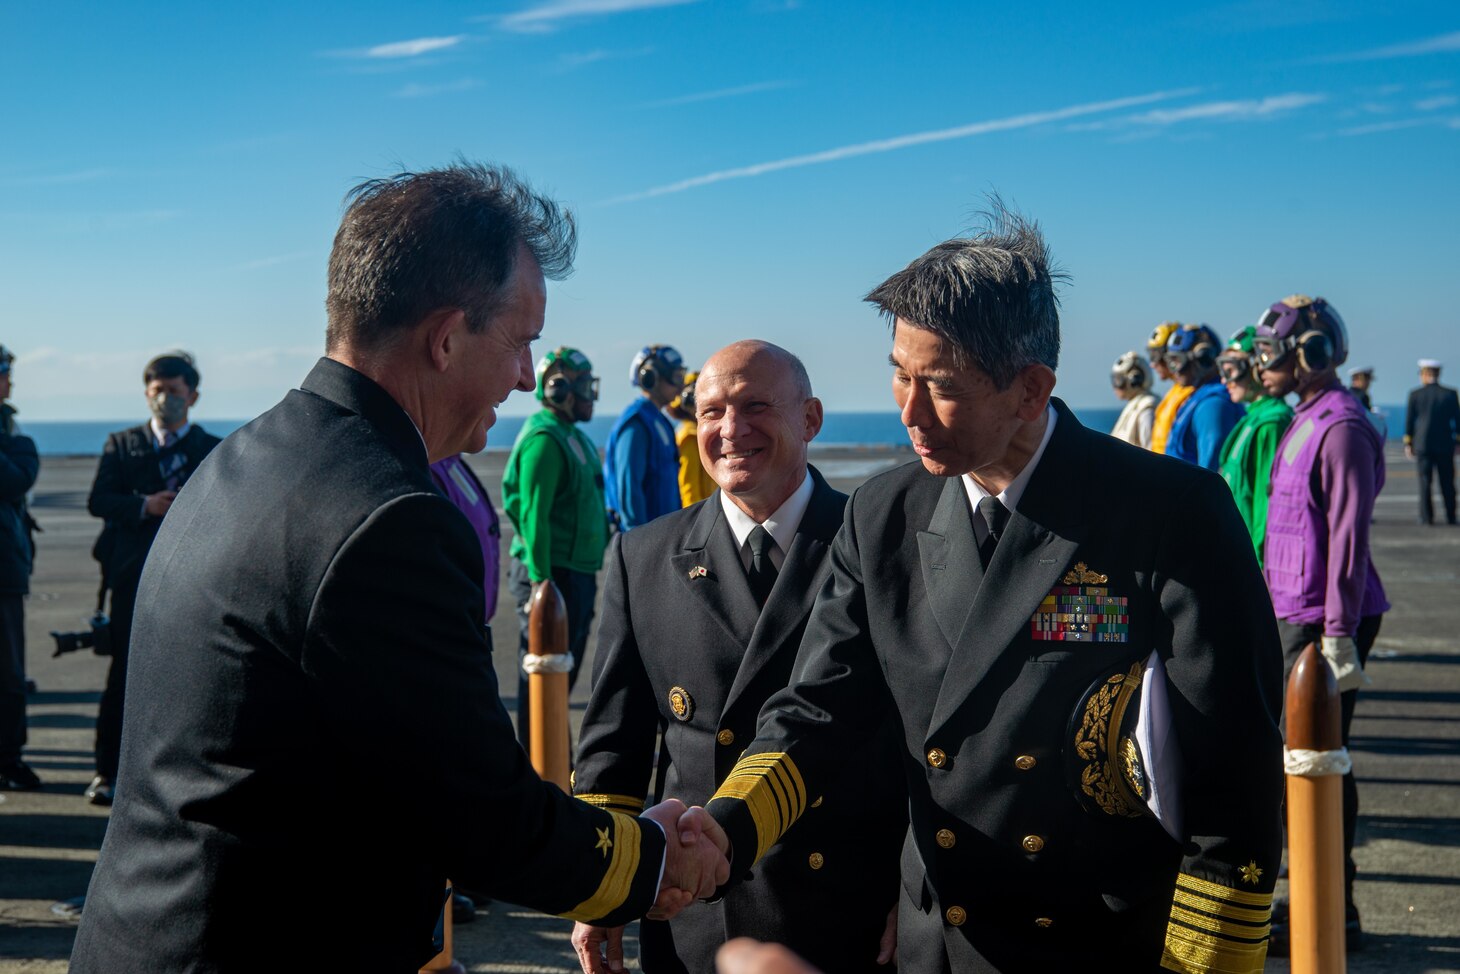 SAGAMI WAN (Nov. 6, 2022) Adm. Sakai Ryo, right, Japan Maritime Self-Defense Force (JMSDF) chief of staff, and Adm. Mike Gilday, center, chief of naval operations, greet Rear Adm. Buzz Donnelly, commander, Task Force 70, on the flight deck of the U.S. Navy’s only forward-deployed aircraft carrier, USS Ronald Reagan (CVN 76), prior to a ship tour as part of the JMSDF Fleet Review 2022 in the Sagami Wan, Nov. 6. Ronald Reagan, the flagship of Carrier Strike Group 5, provides a combat-ready force that protects and defends the United States, and supports alliances, partnerships and collective maritime interests in the Indo-Pacific region. (U.S. Navy photo by Mass Communication Specialist 3rd Class Gray Gibson)